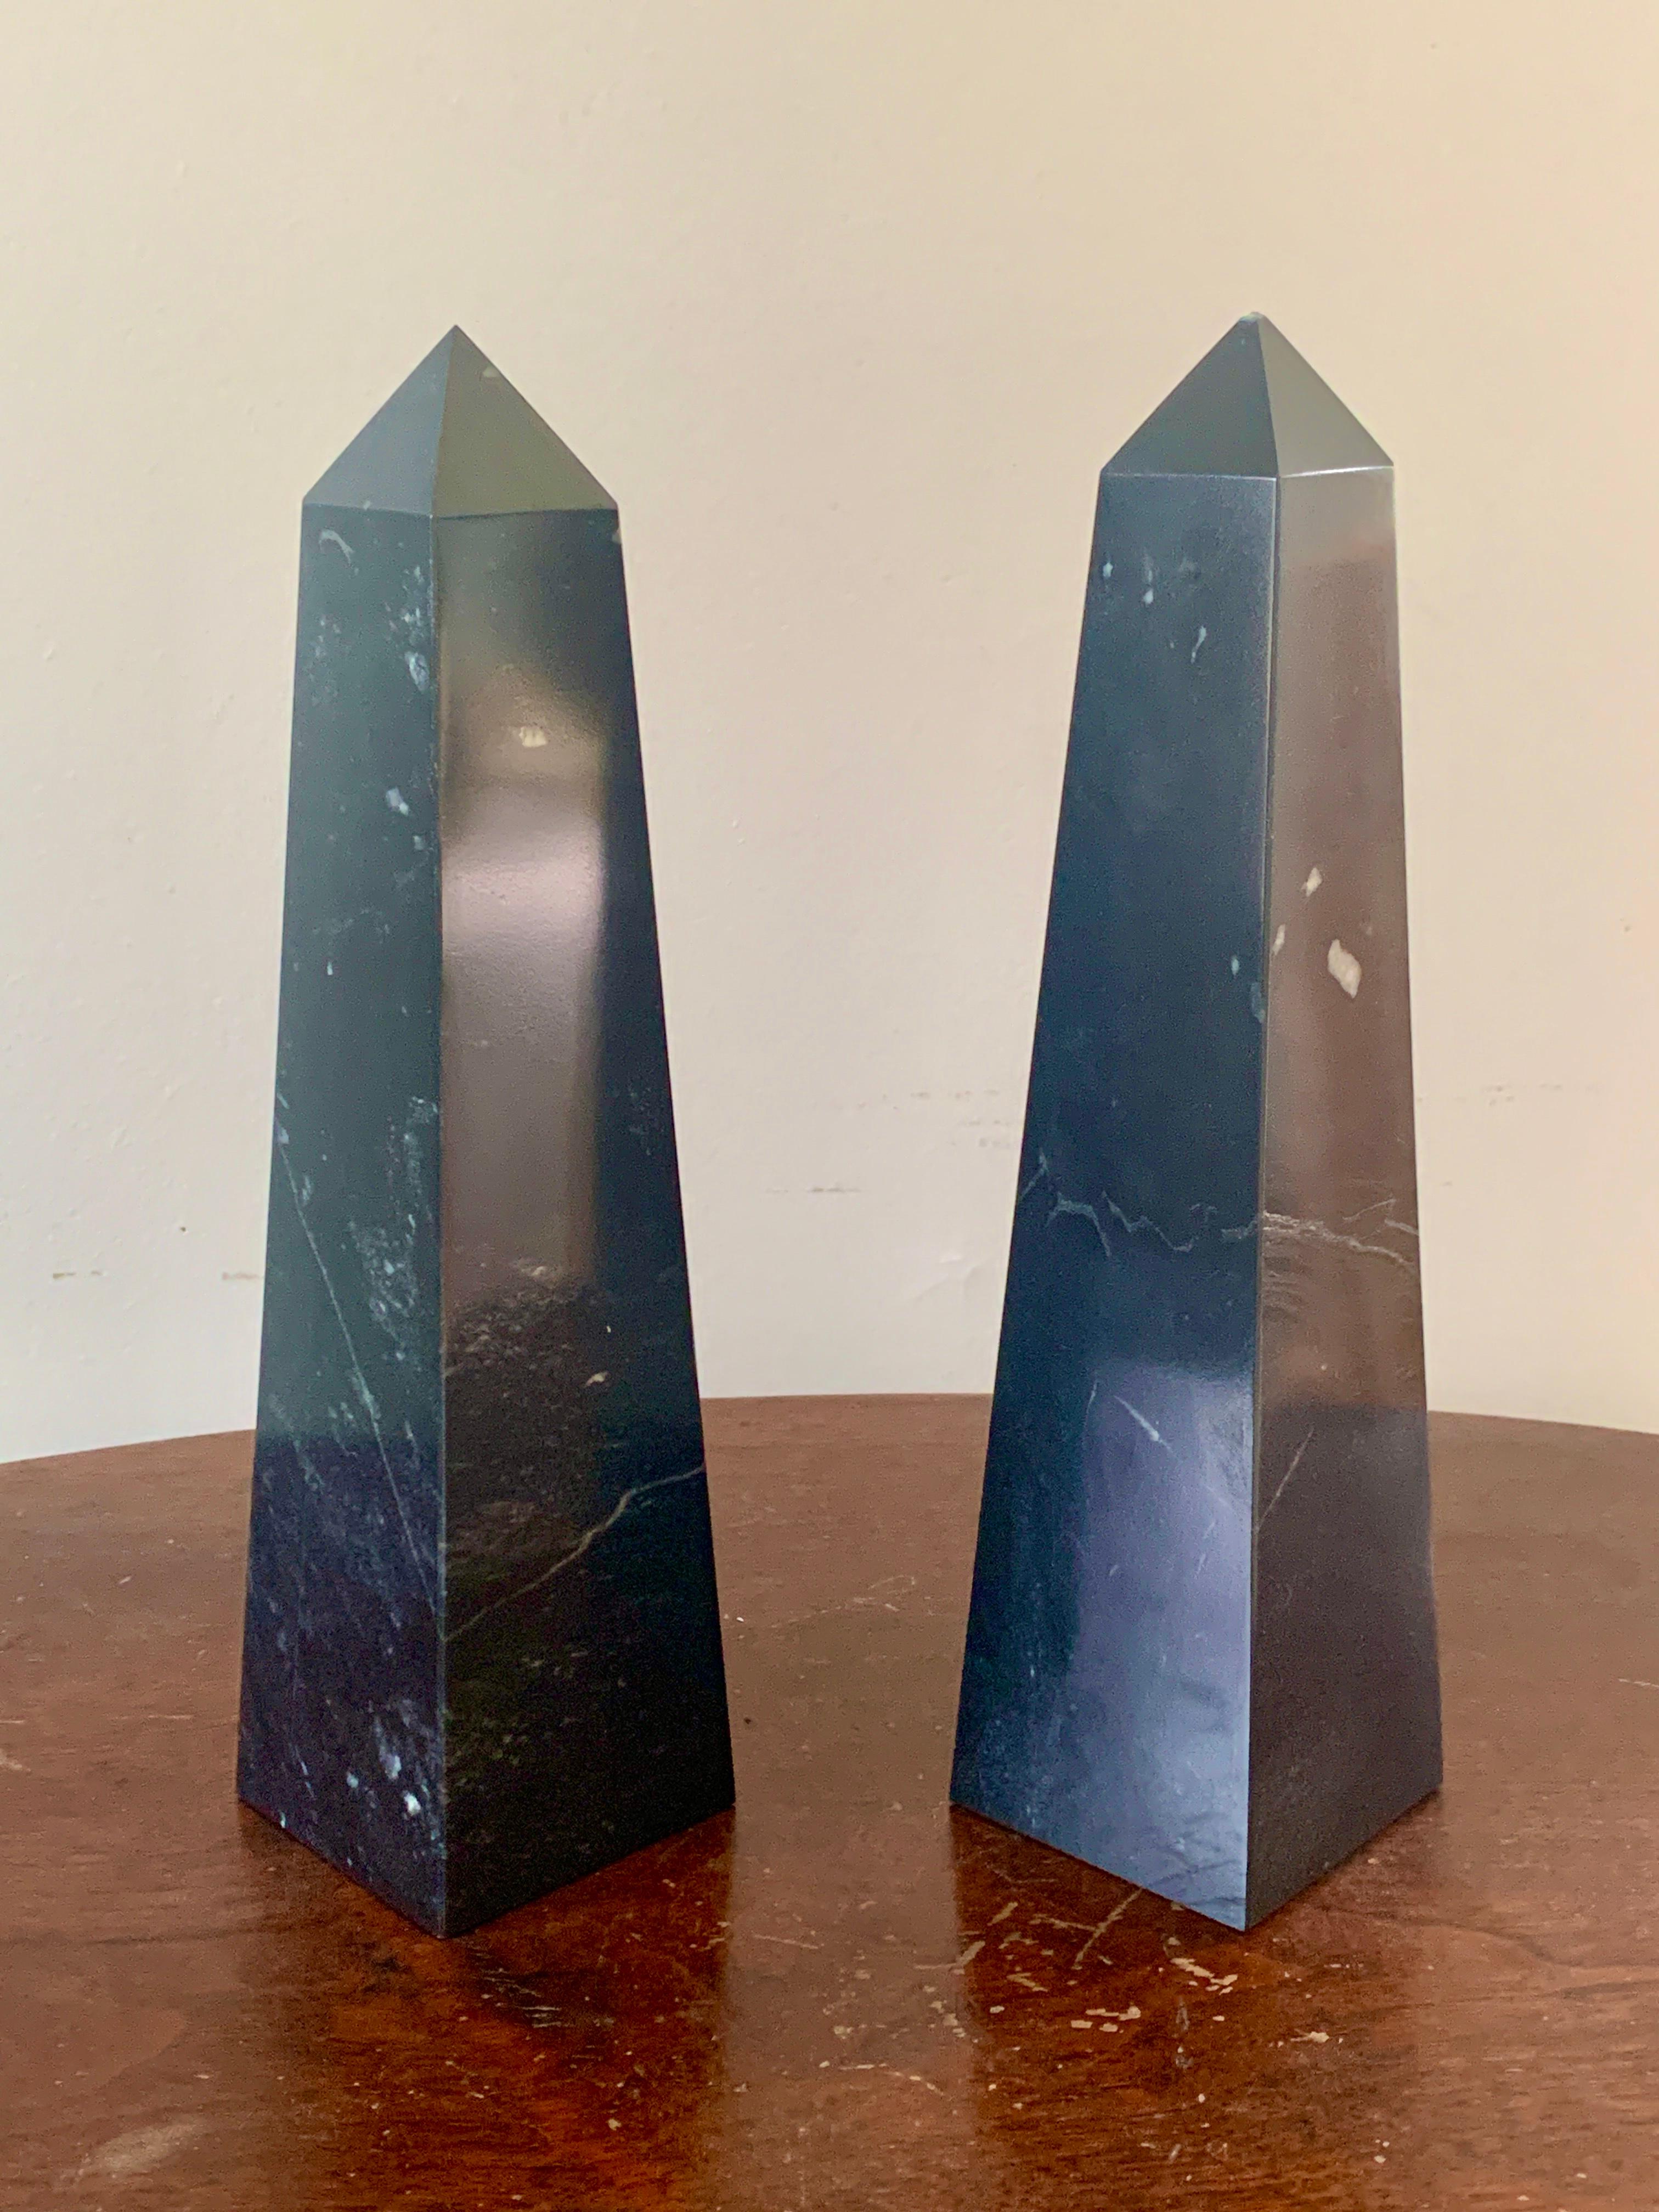 A stunning pair of neoclassical style or Grand Tour style solid marble black & gray obelisks

Measures: 3